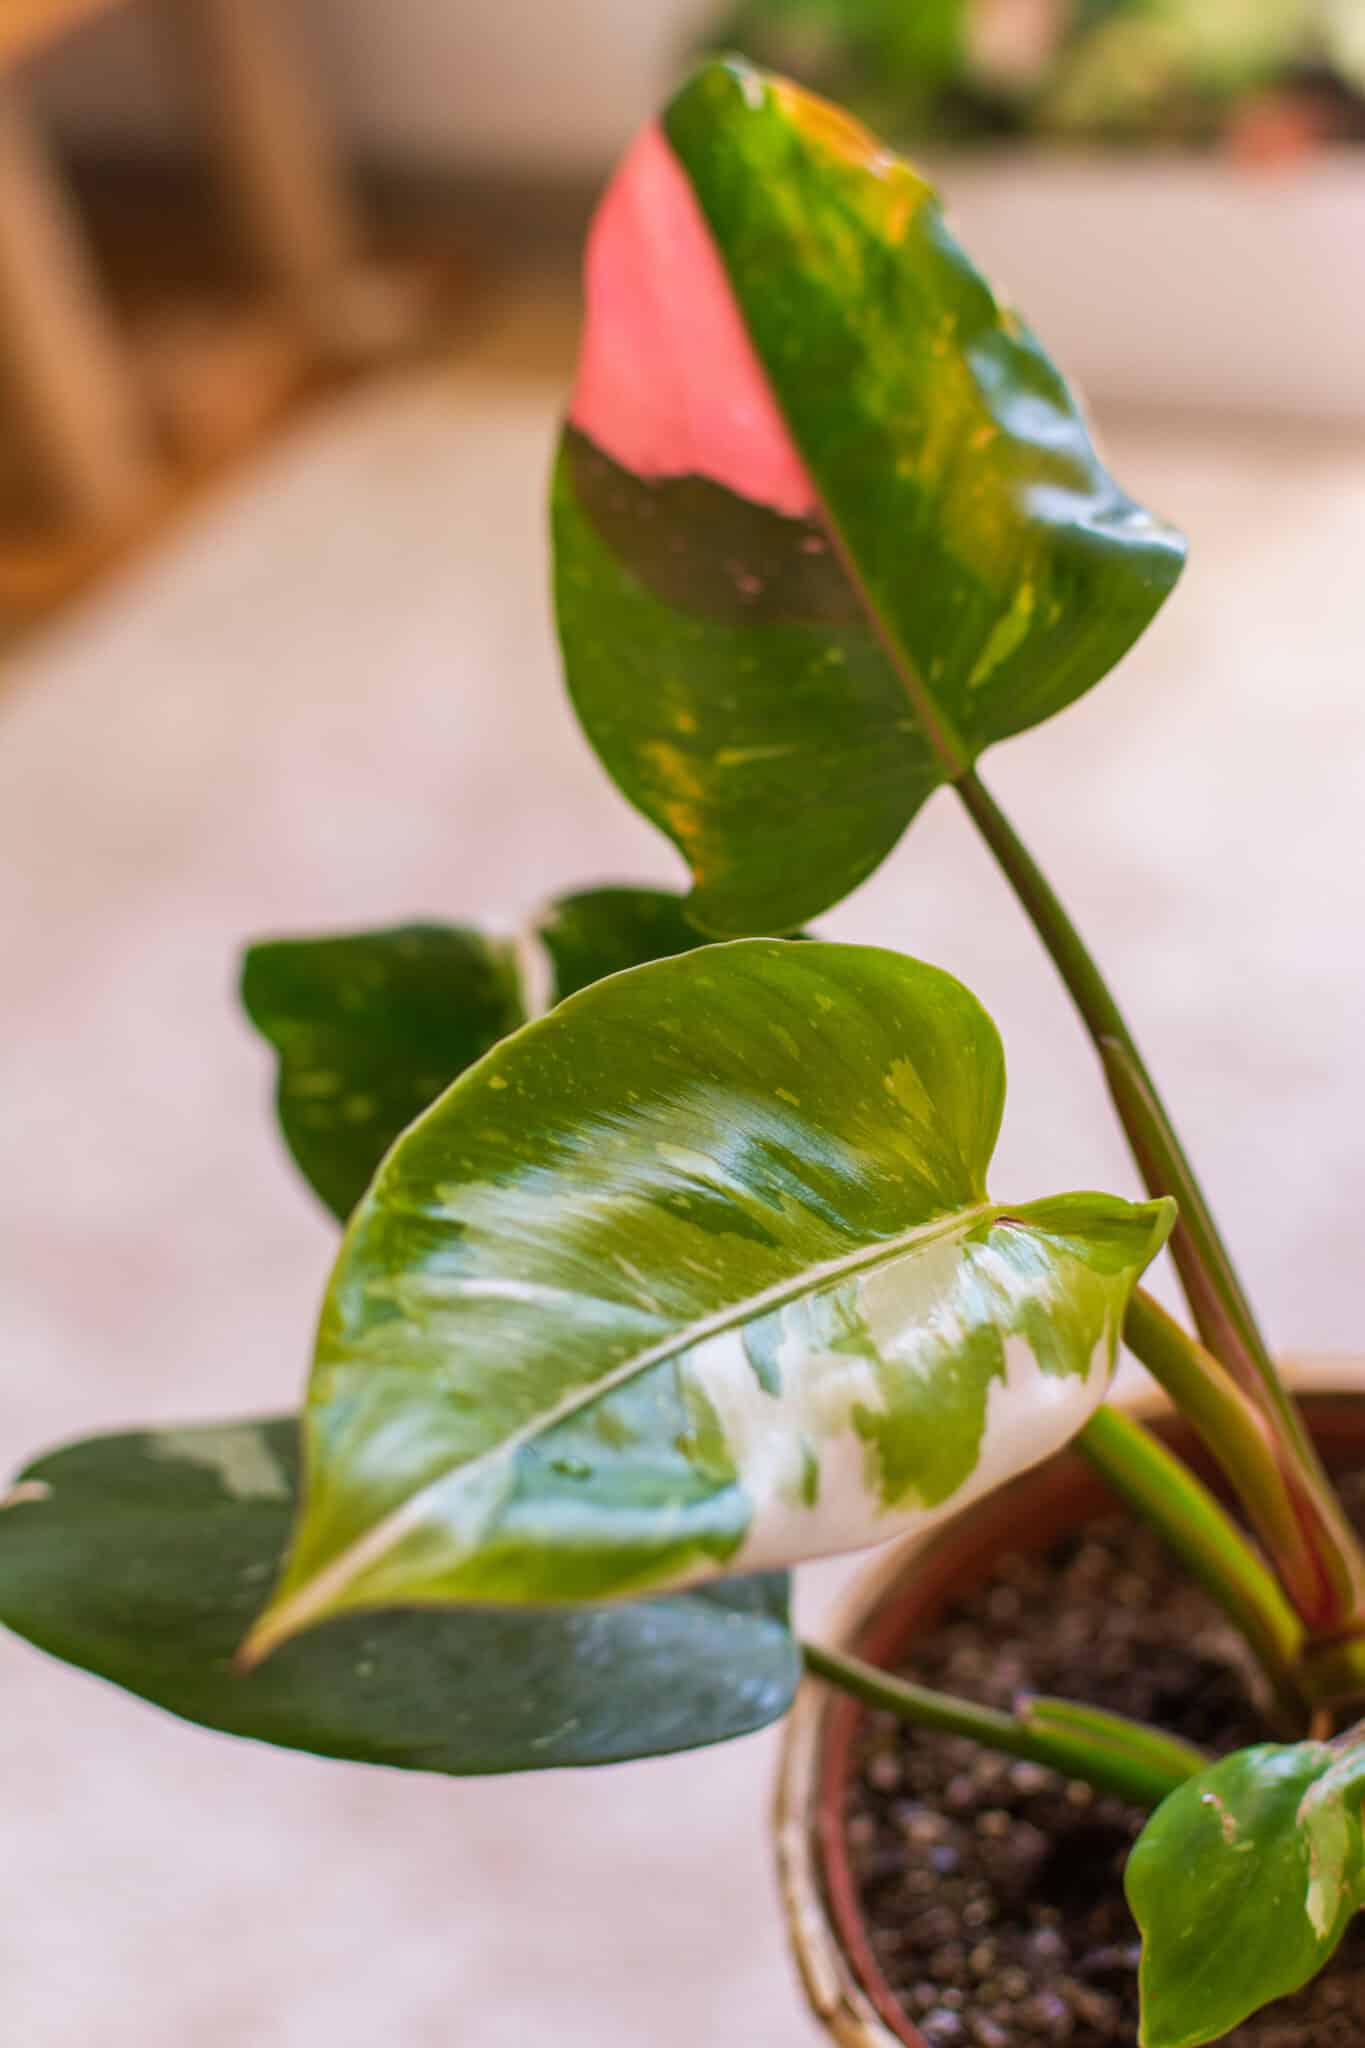 philodendron white princess pink variegation debuter collection plante